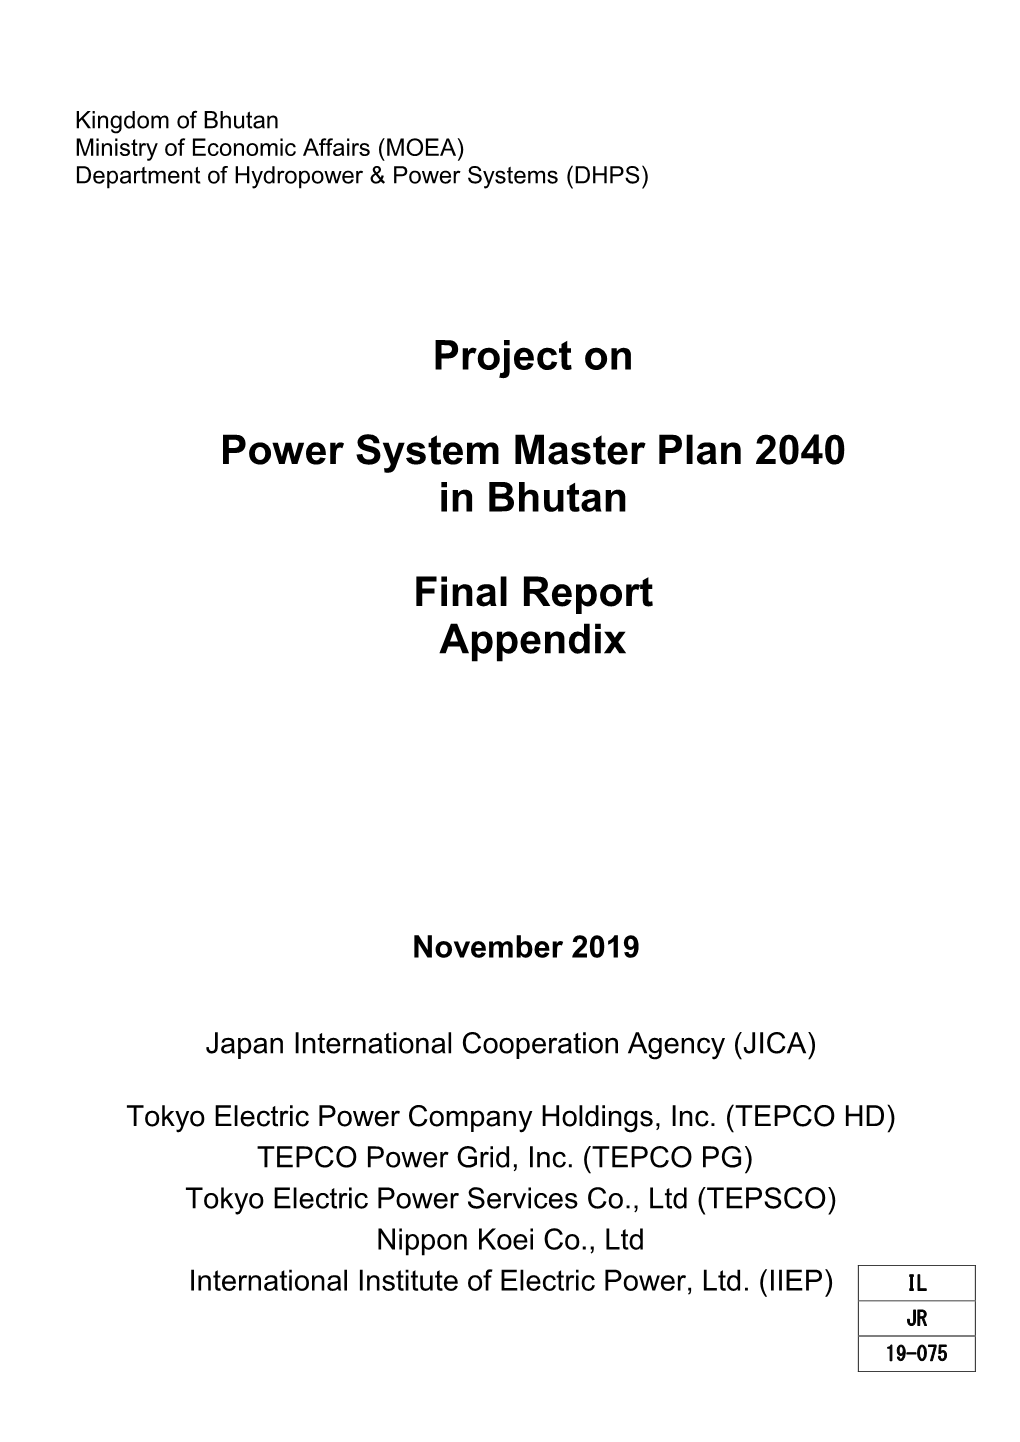 Project on Power System Master Plan 2040 in Bhutan Final Report